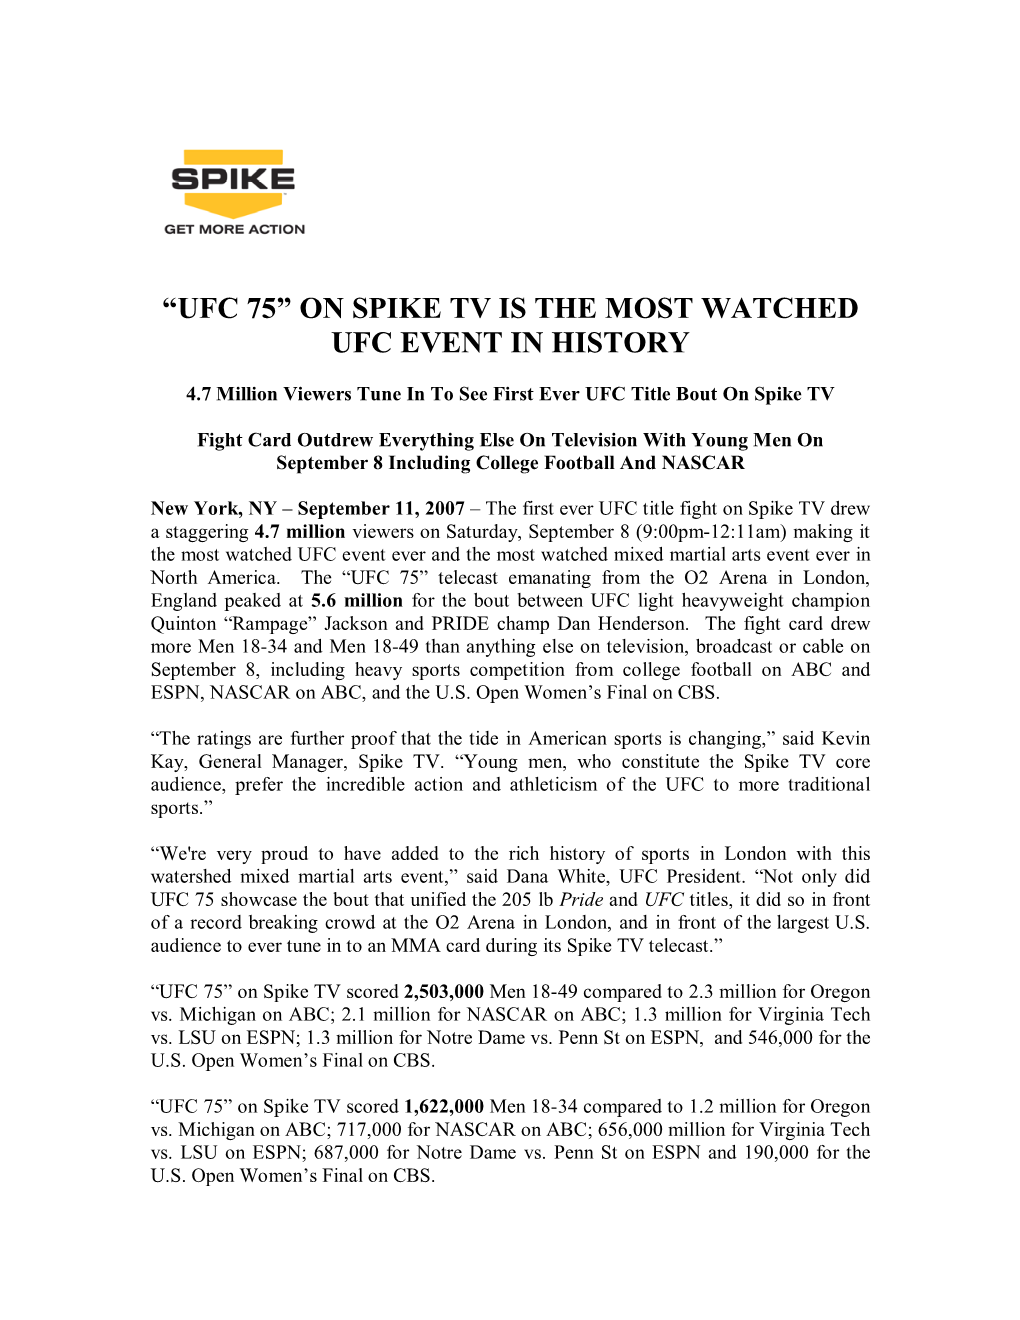 —Ufc 75“ on Spike Tv Is the Most Watched Ufc Event in History